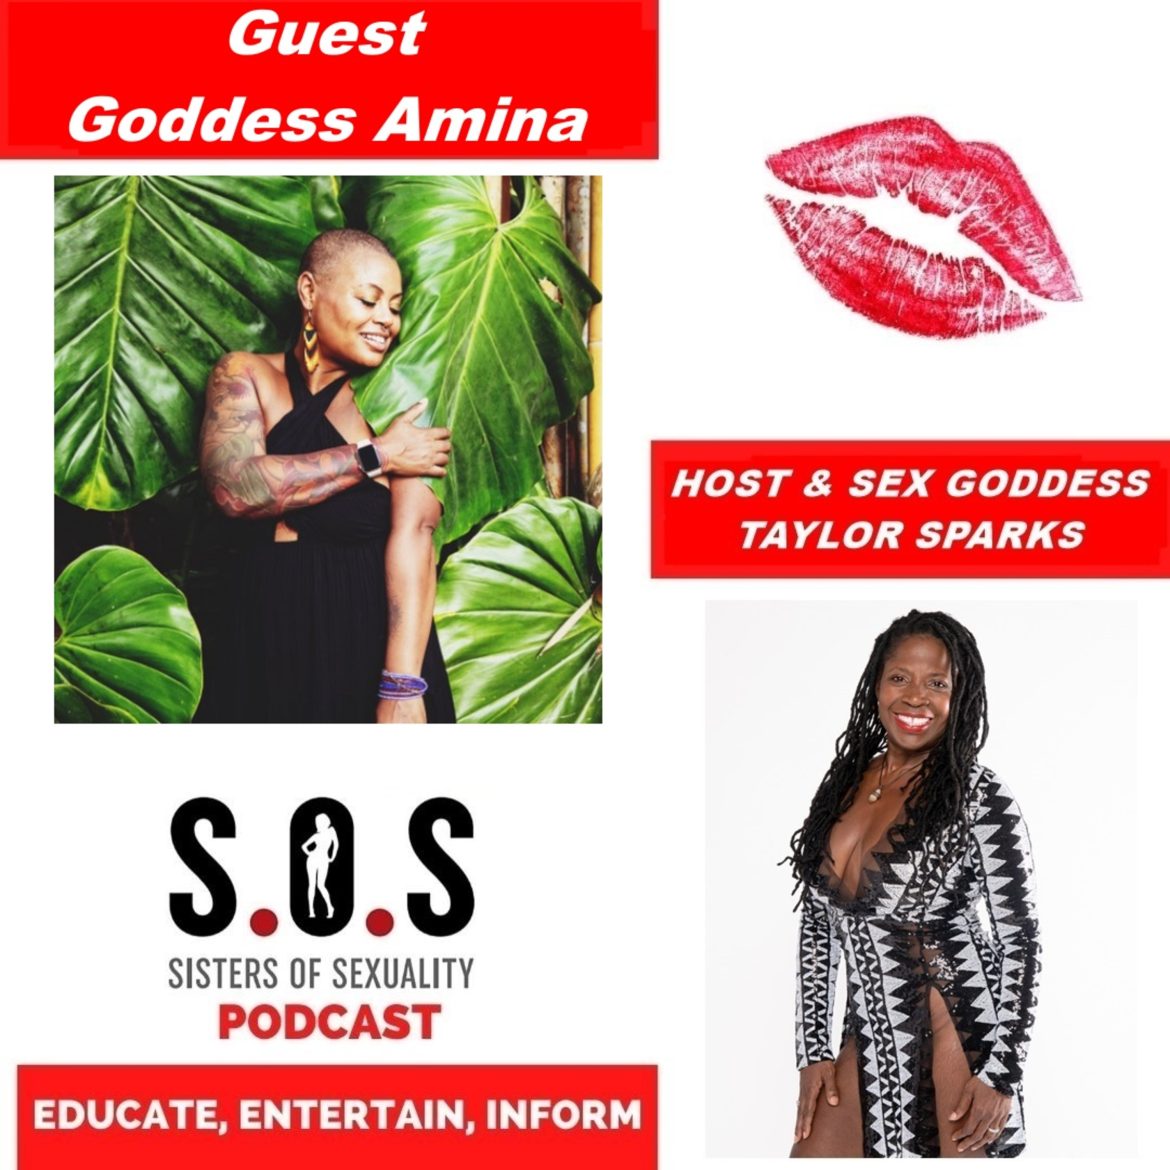 Black Podcasting - Goddess Amina Helps Us Find Our Way HOME To Our Bodies